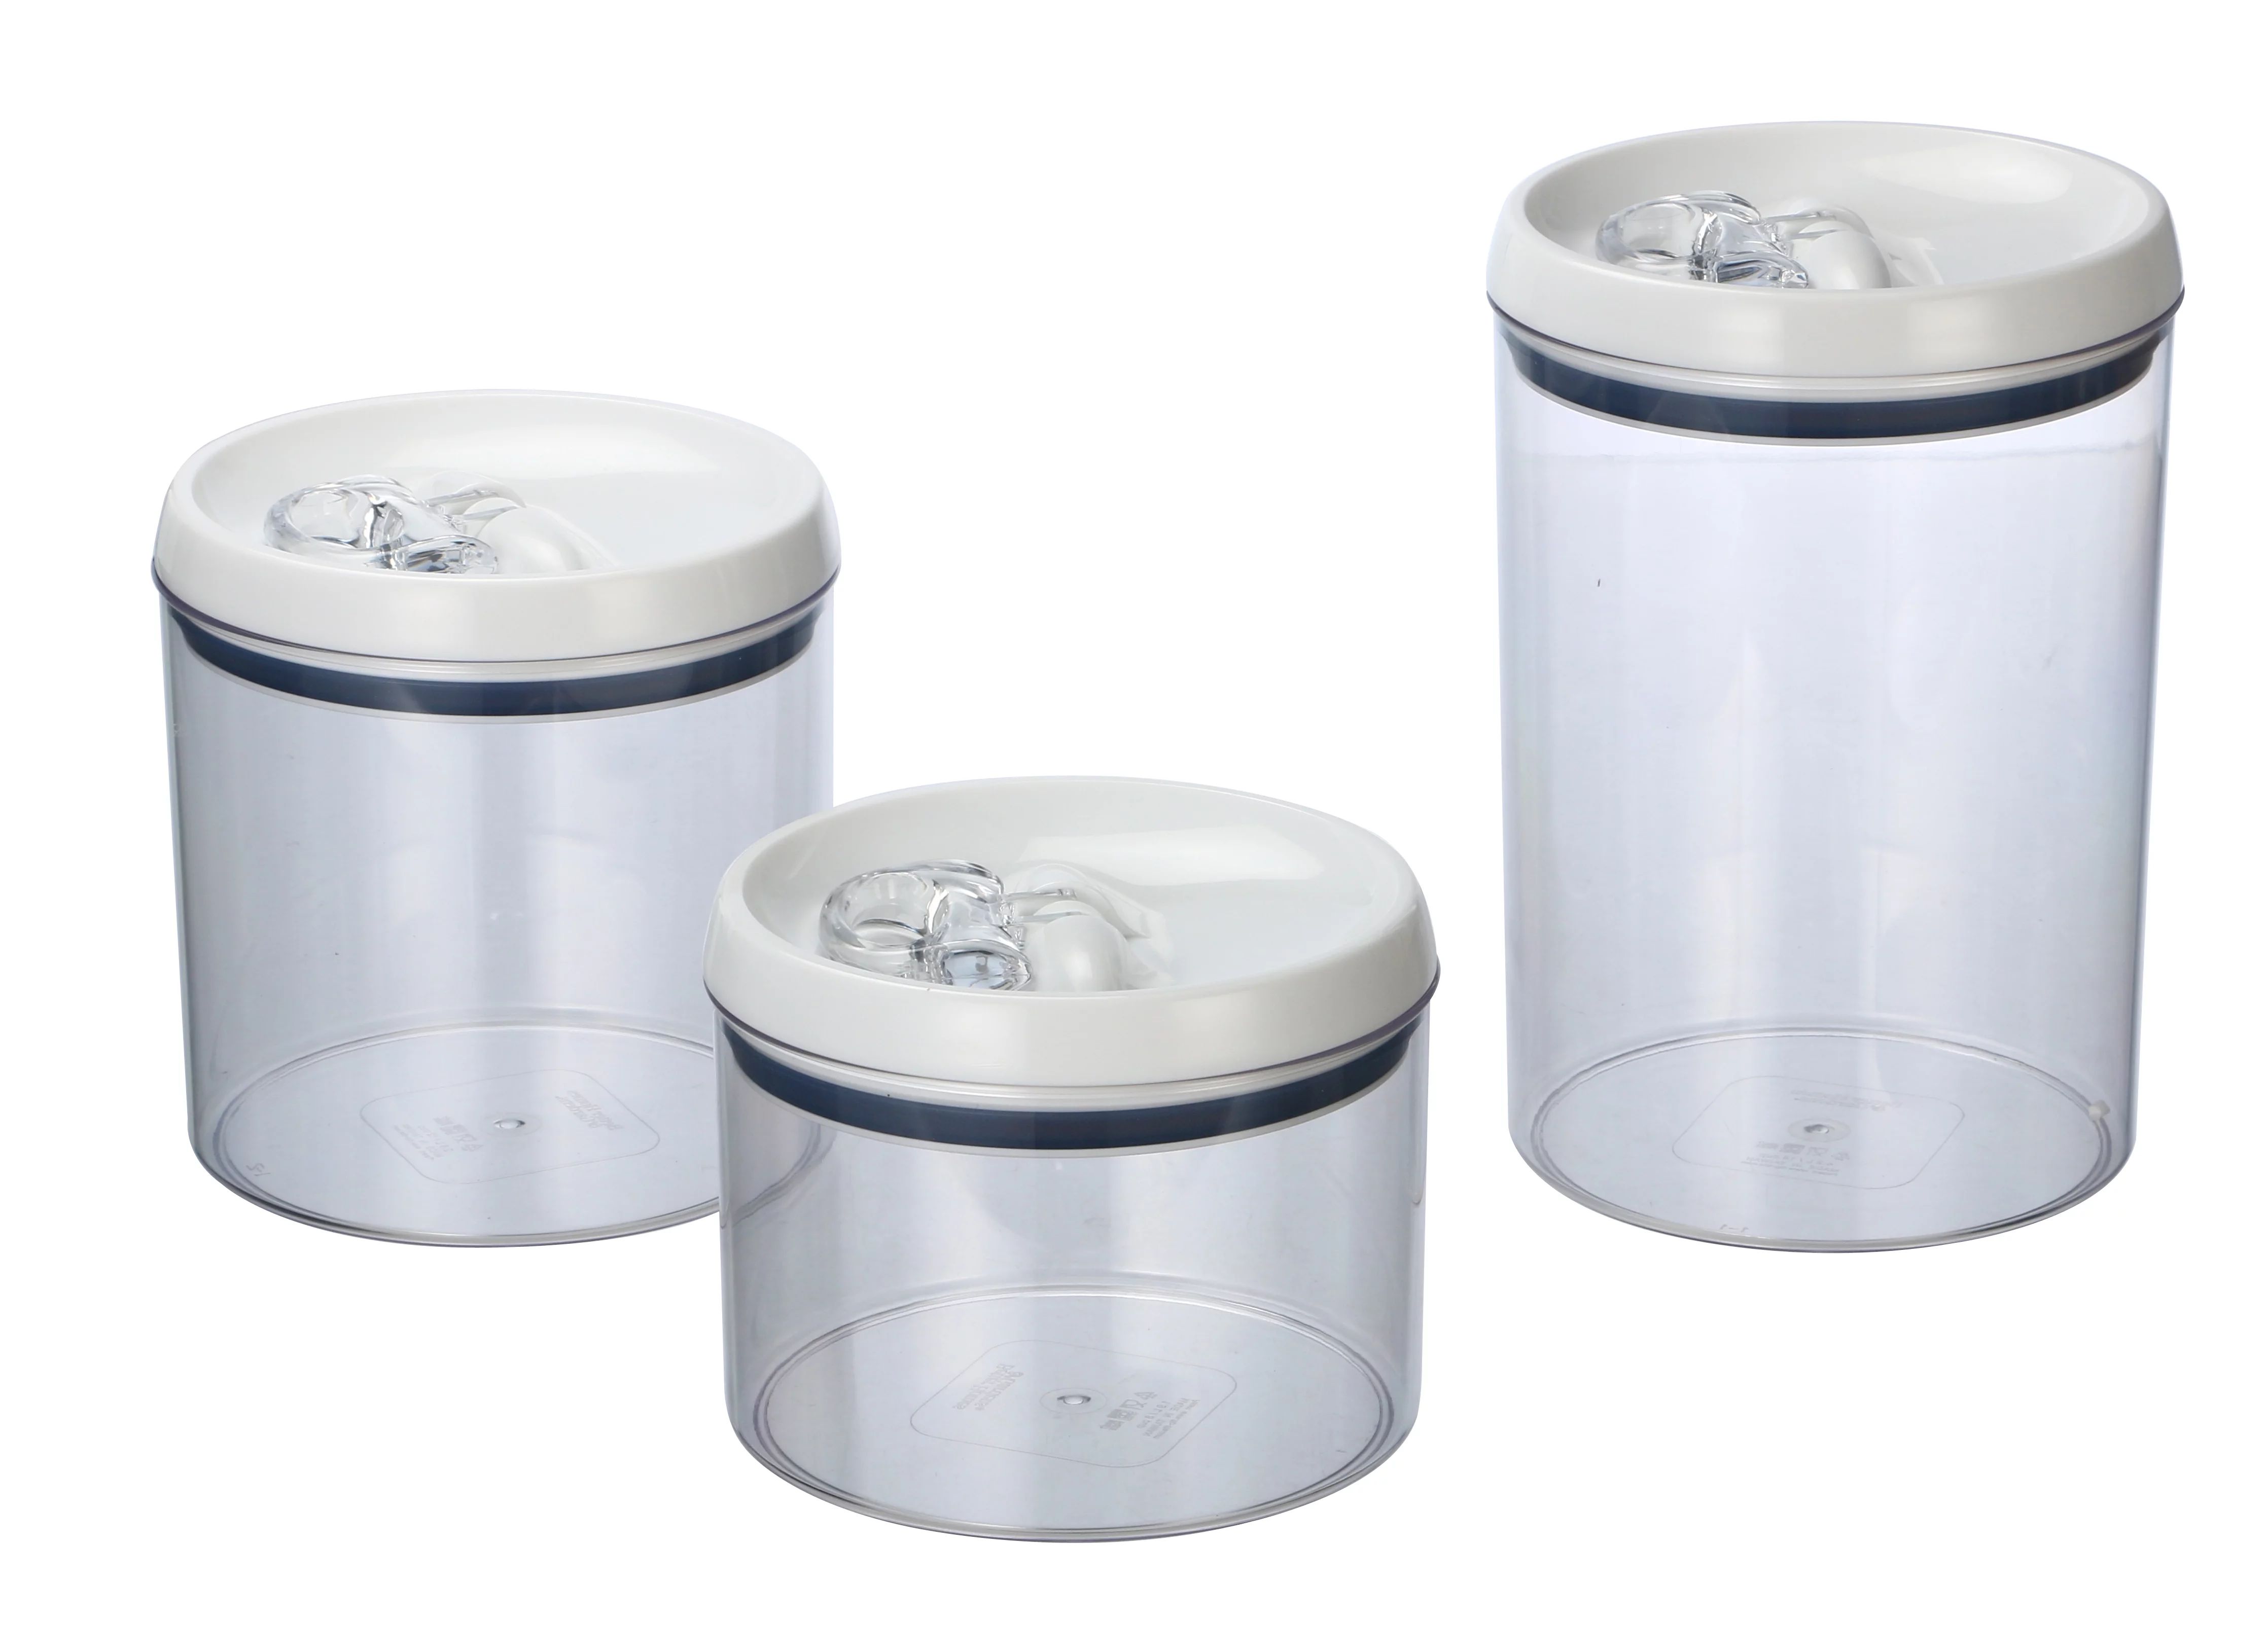 Better Homes & Gardens Canister Pack of 3 - Round Flip-Tite Food Storage Container Set | Walmart (US)